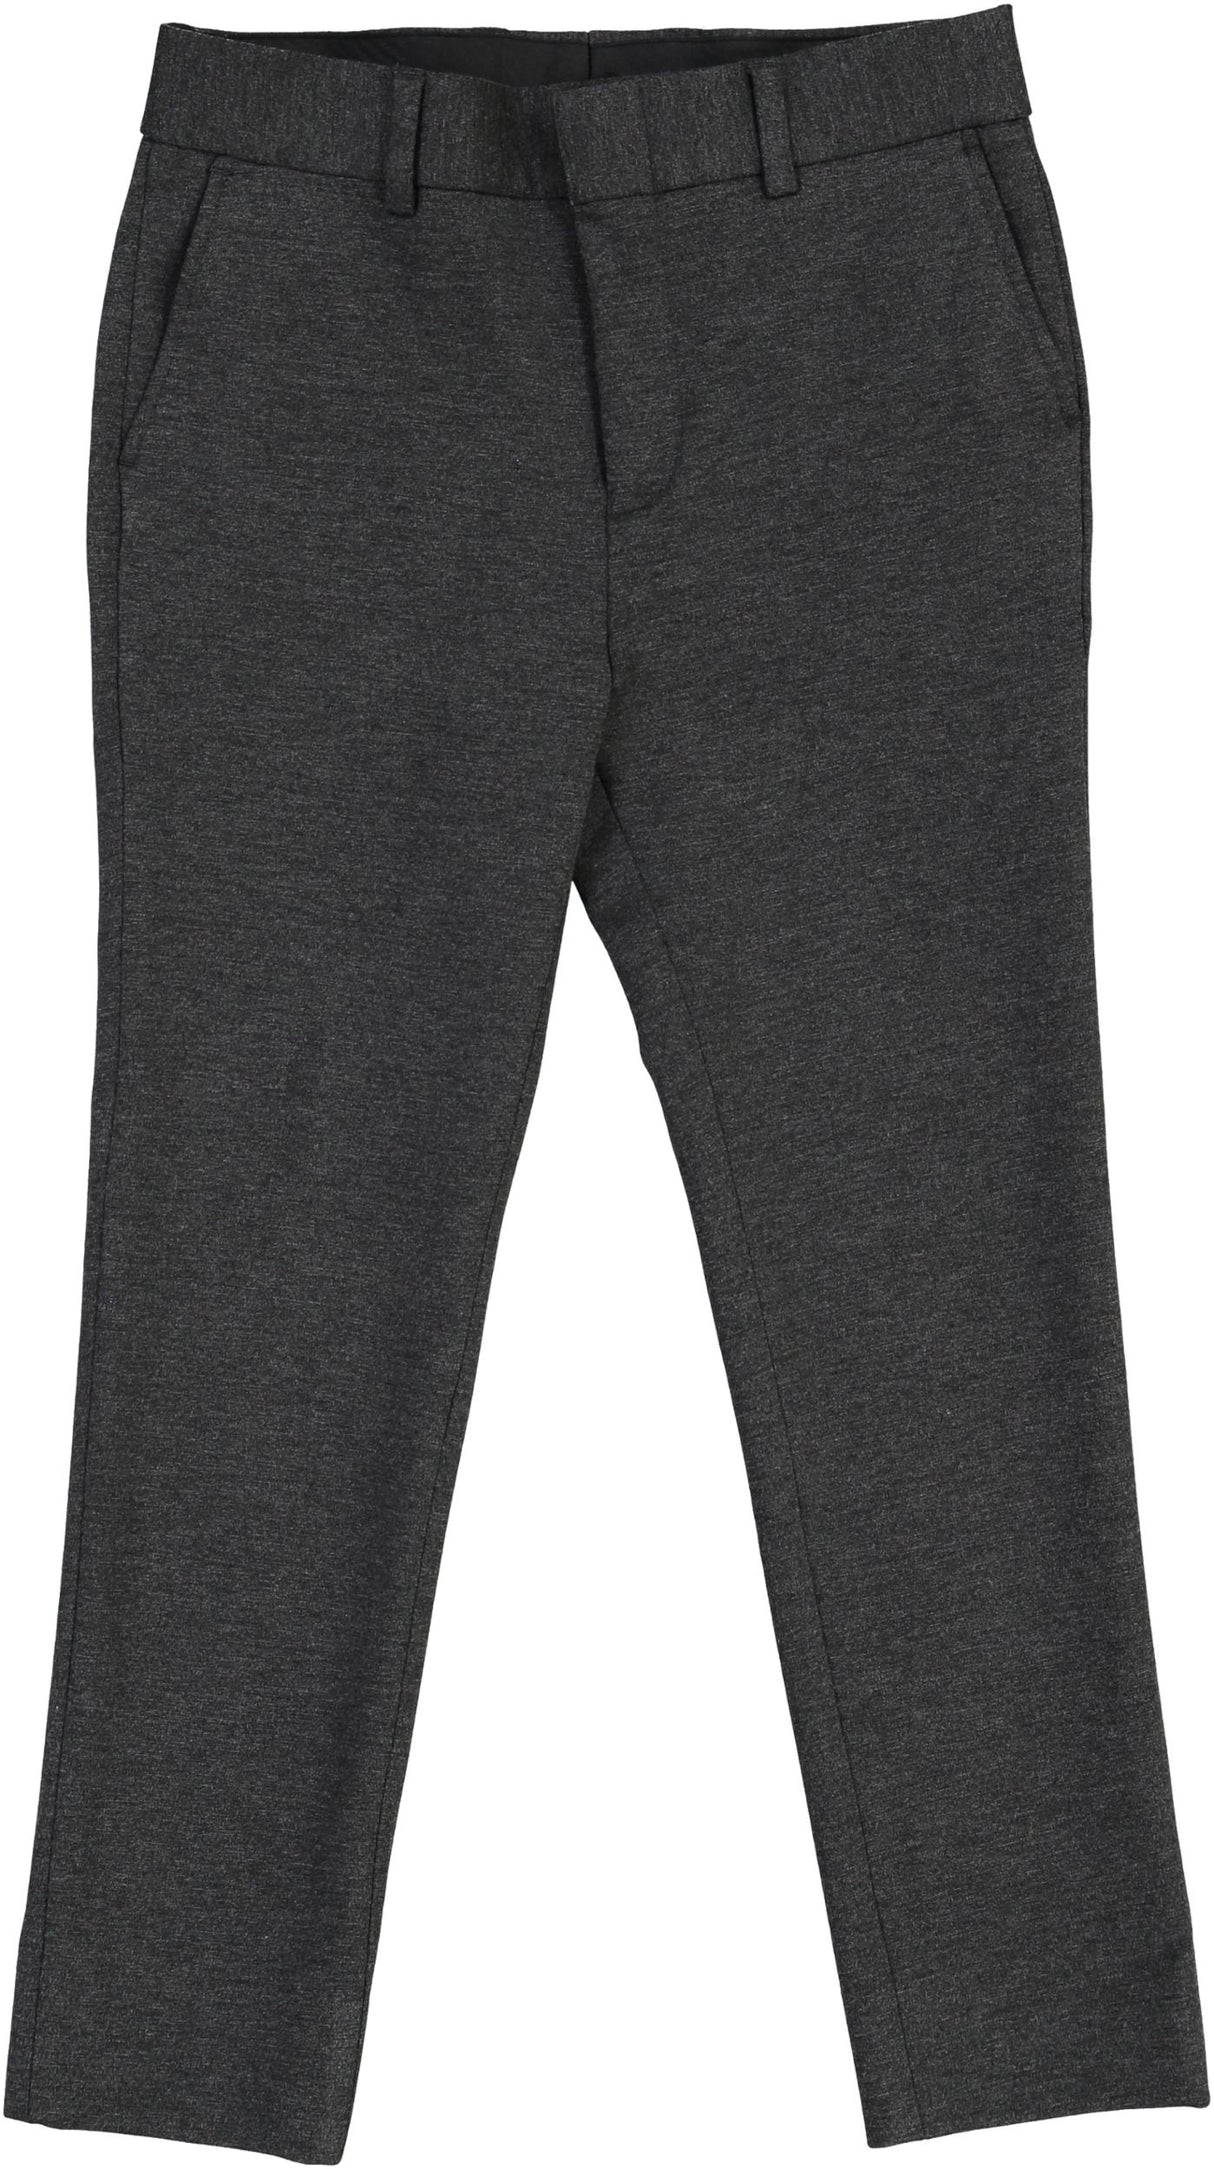 T.O. Collection Boys Charcoal Heather Soho Stretch Suit Separates - 9131-33